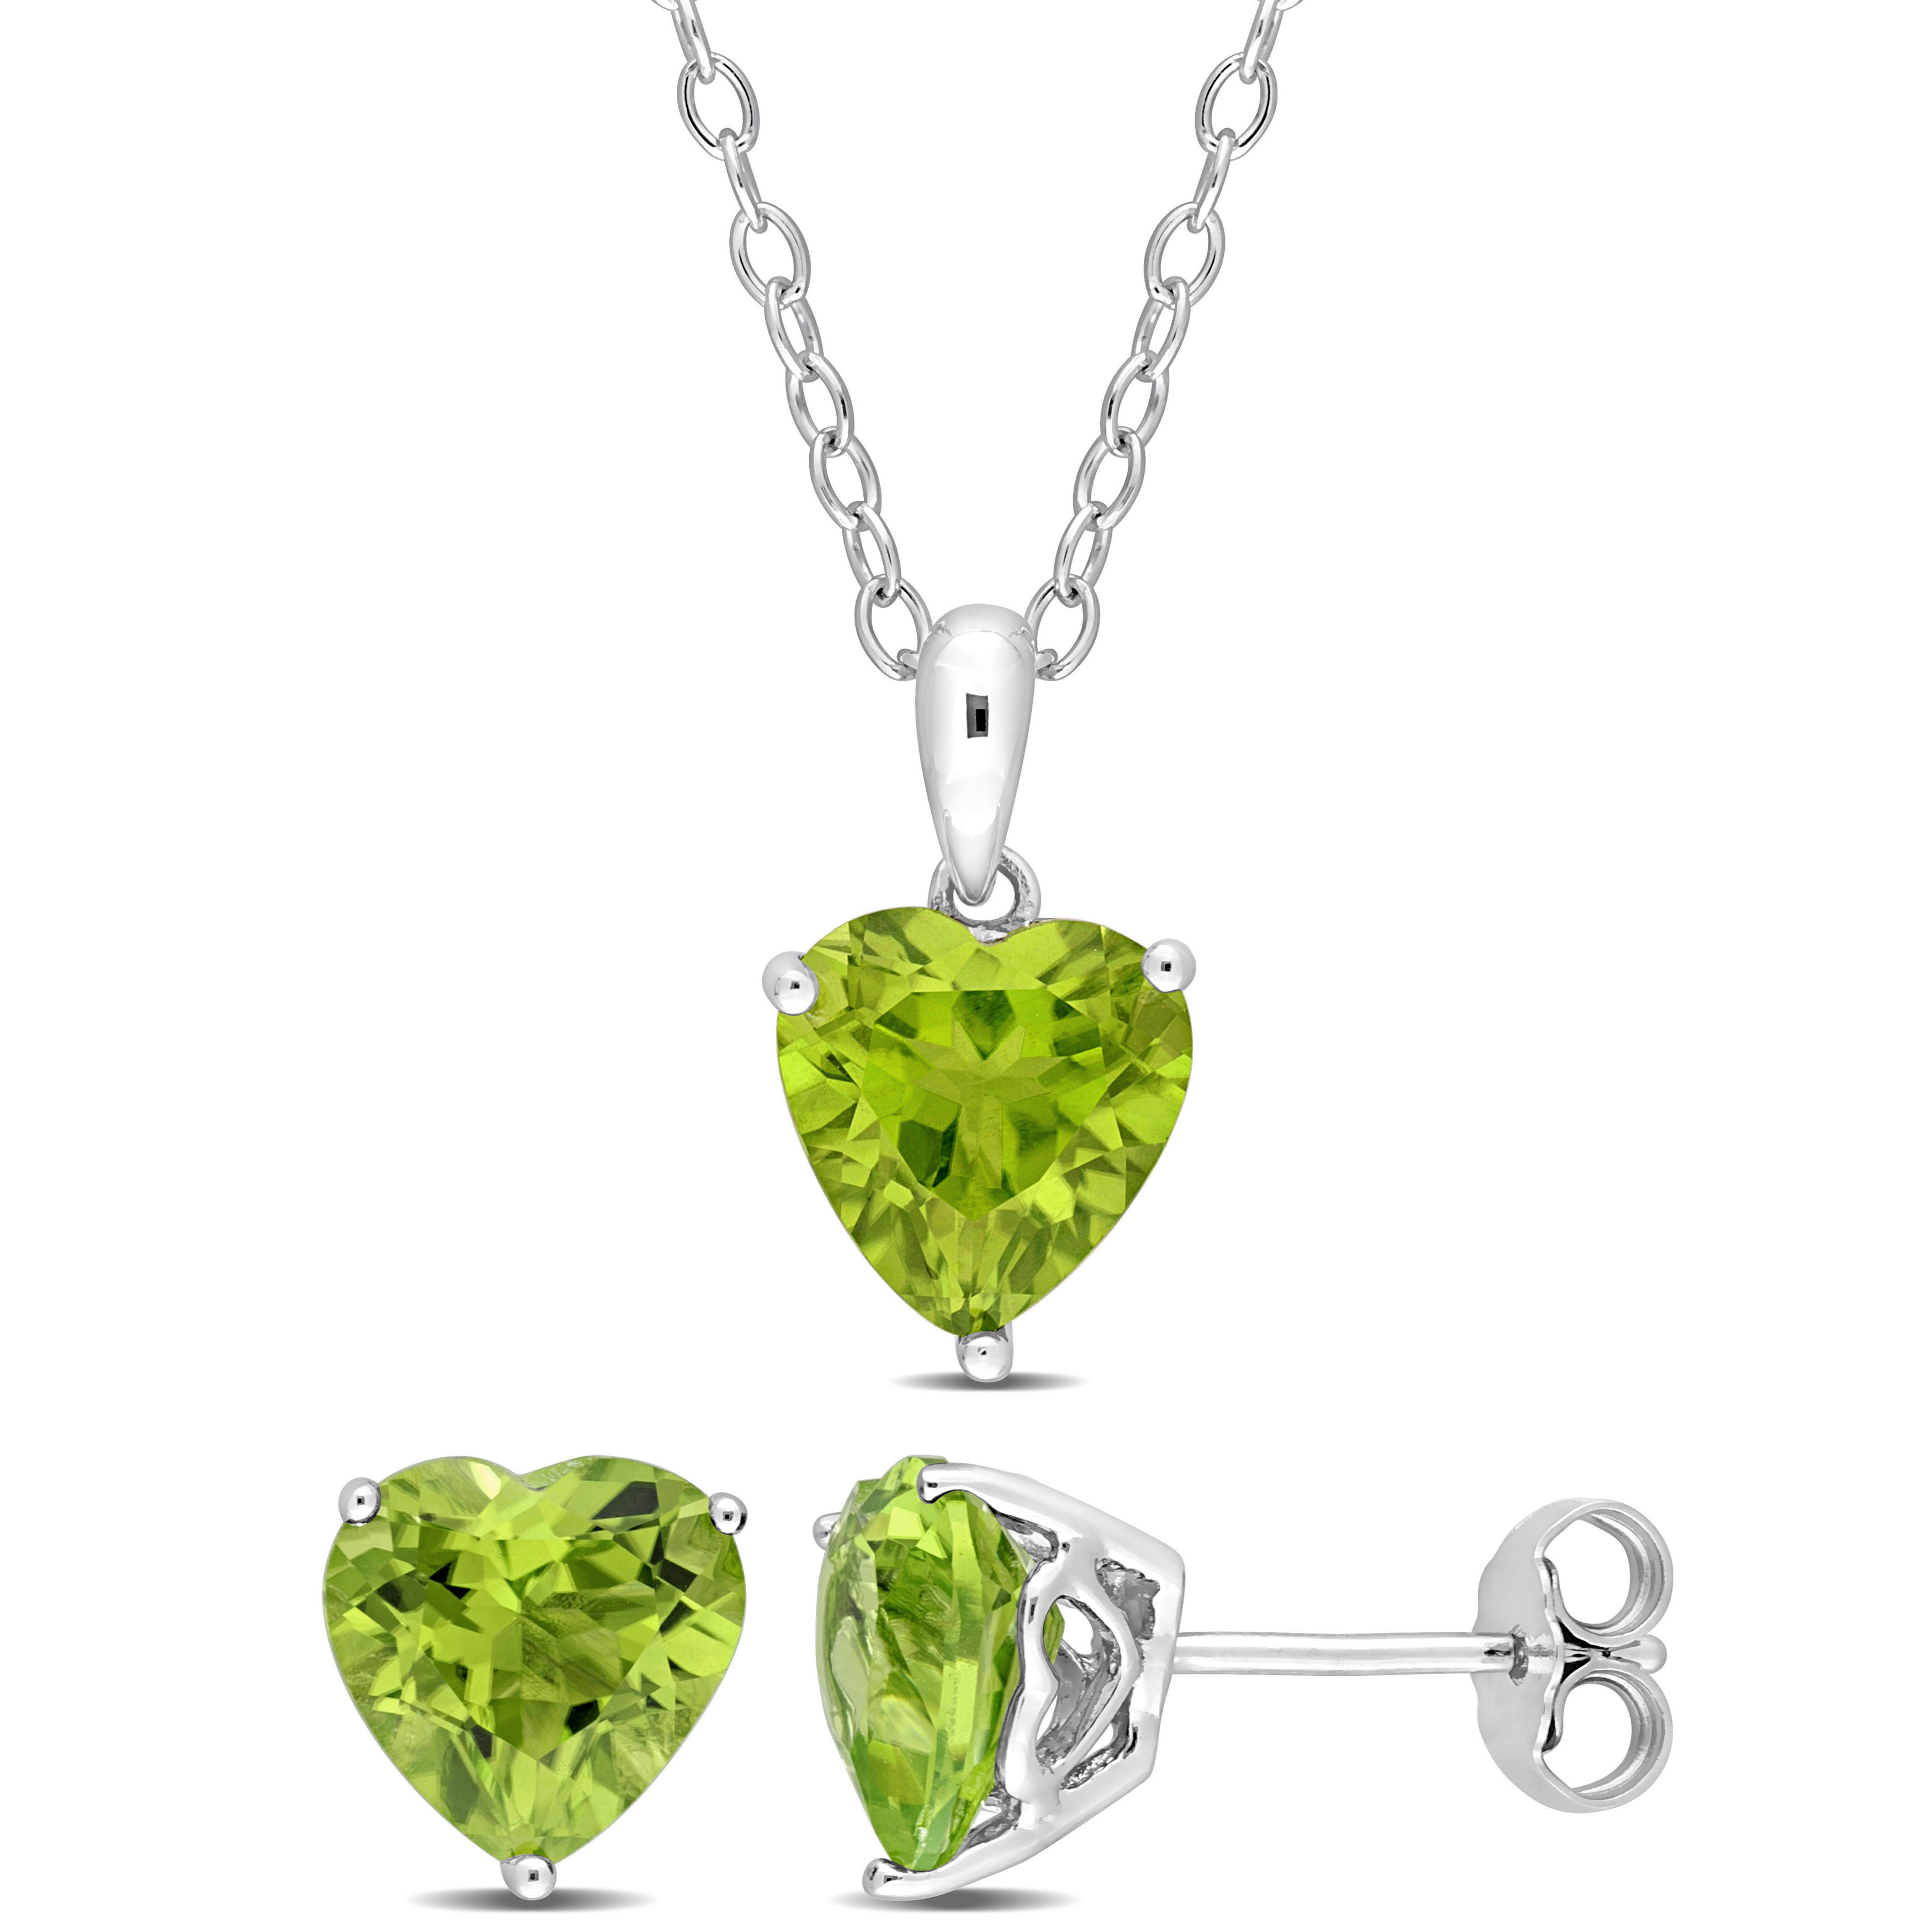 5 CT TGW Heart-Shape Peridot 2-Piece Solitaire Pendant with Chain and Stud Earrings Set in Sterling Silver